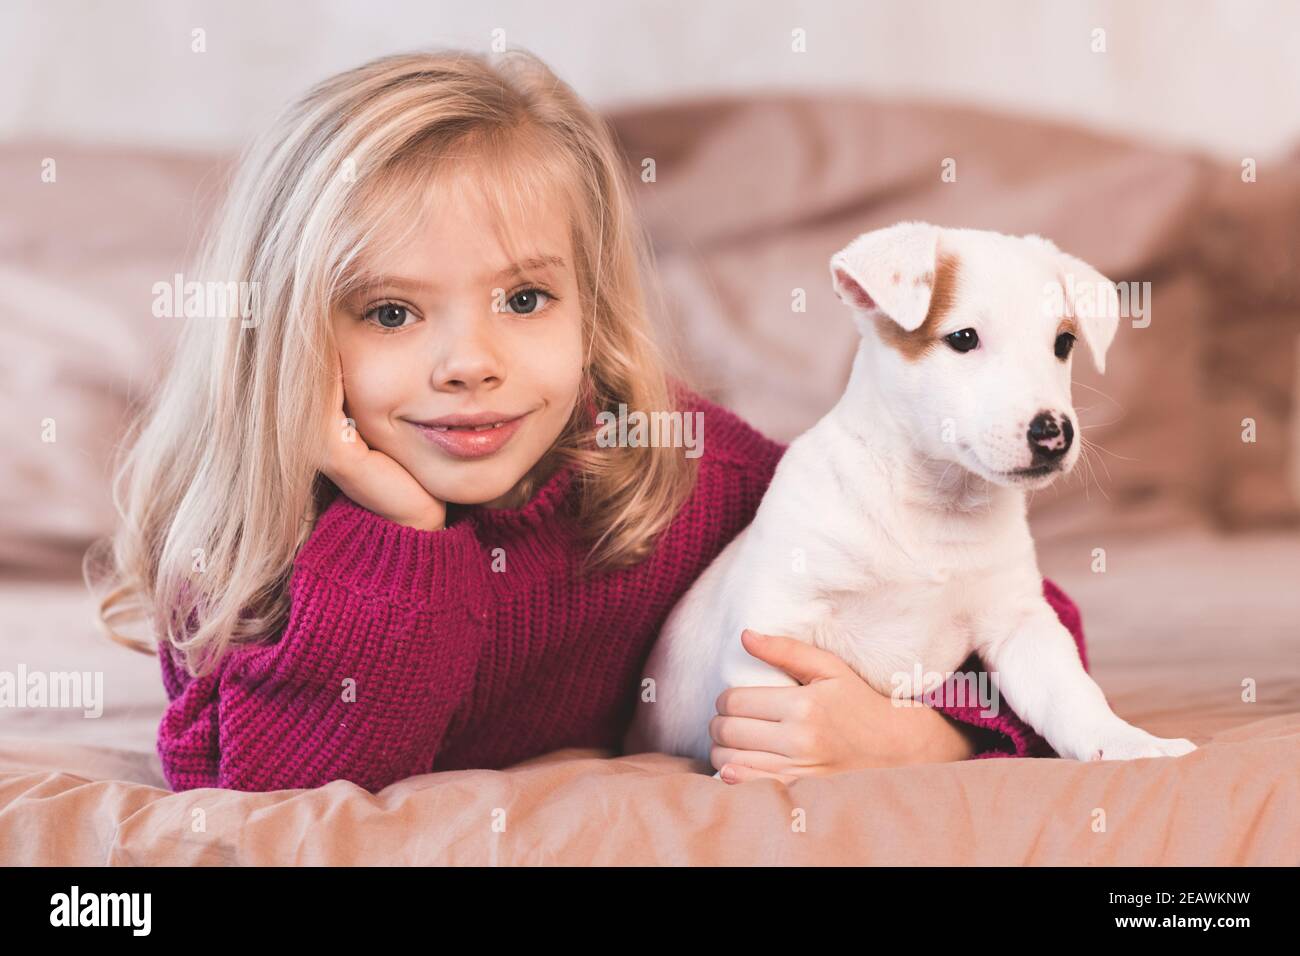 Smiling happy child girl 5-6 year old holding puppy dog lying in bed close up. Looking at camera. Childhood. Friendship. Stock Photo